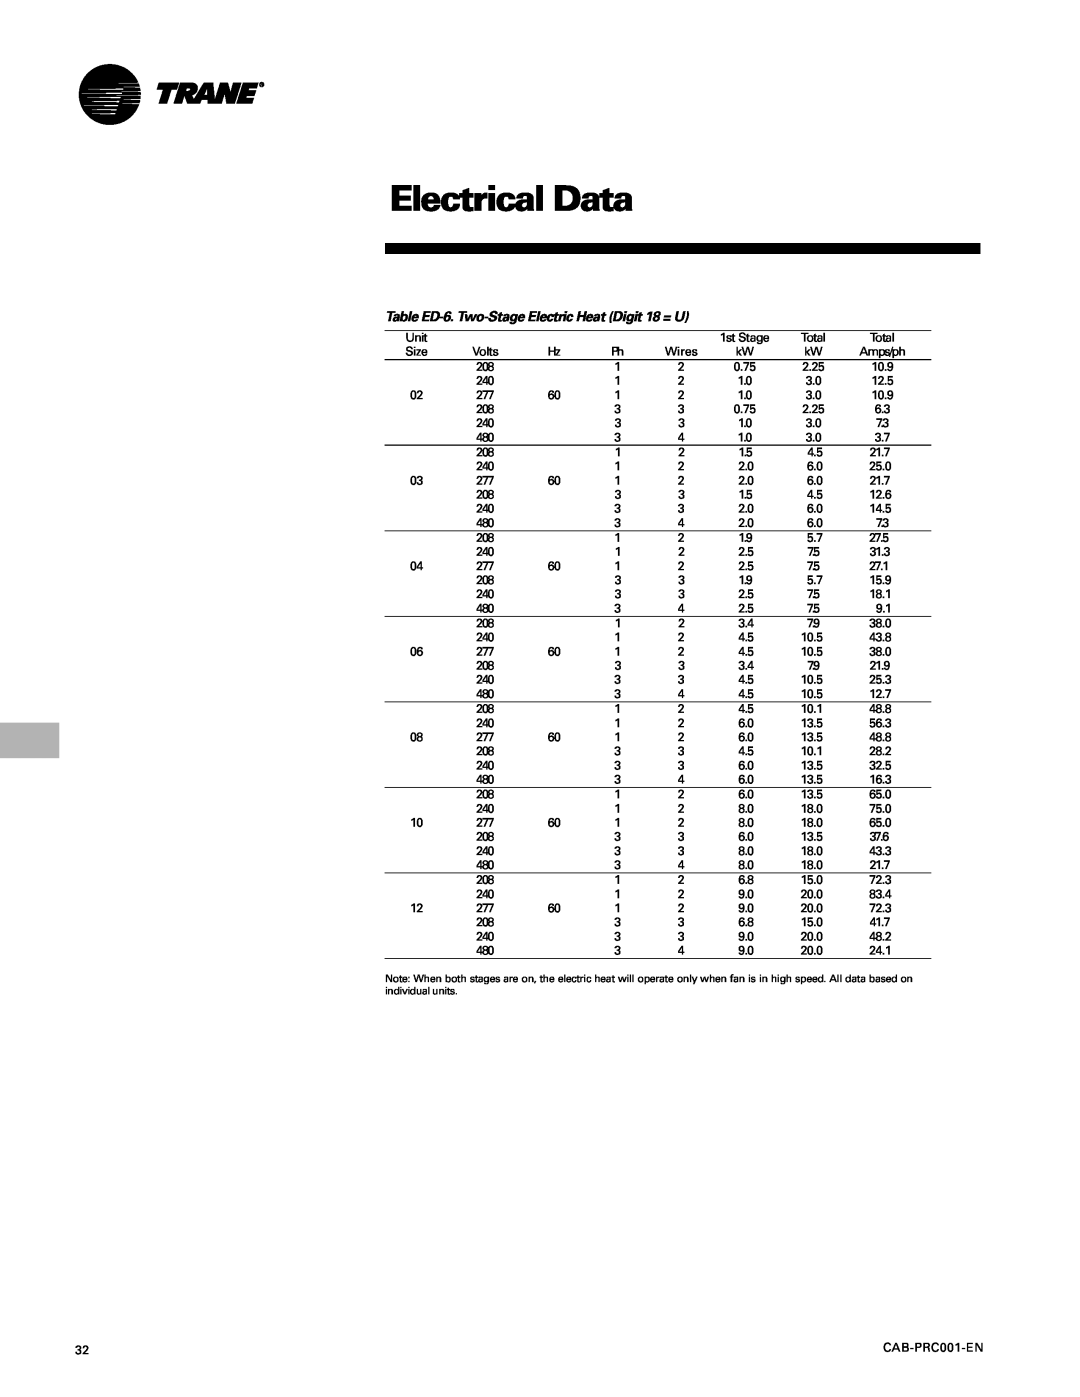 Trane CAB-PRC001-EN manual Electrical Data, Table ED-6. Two-StageElectric Heat Digit 18 = U 